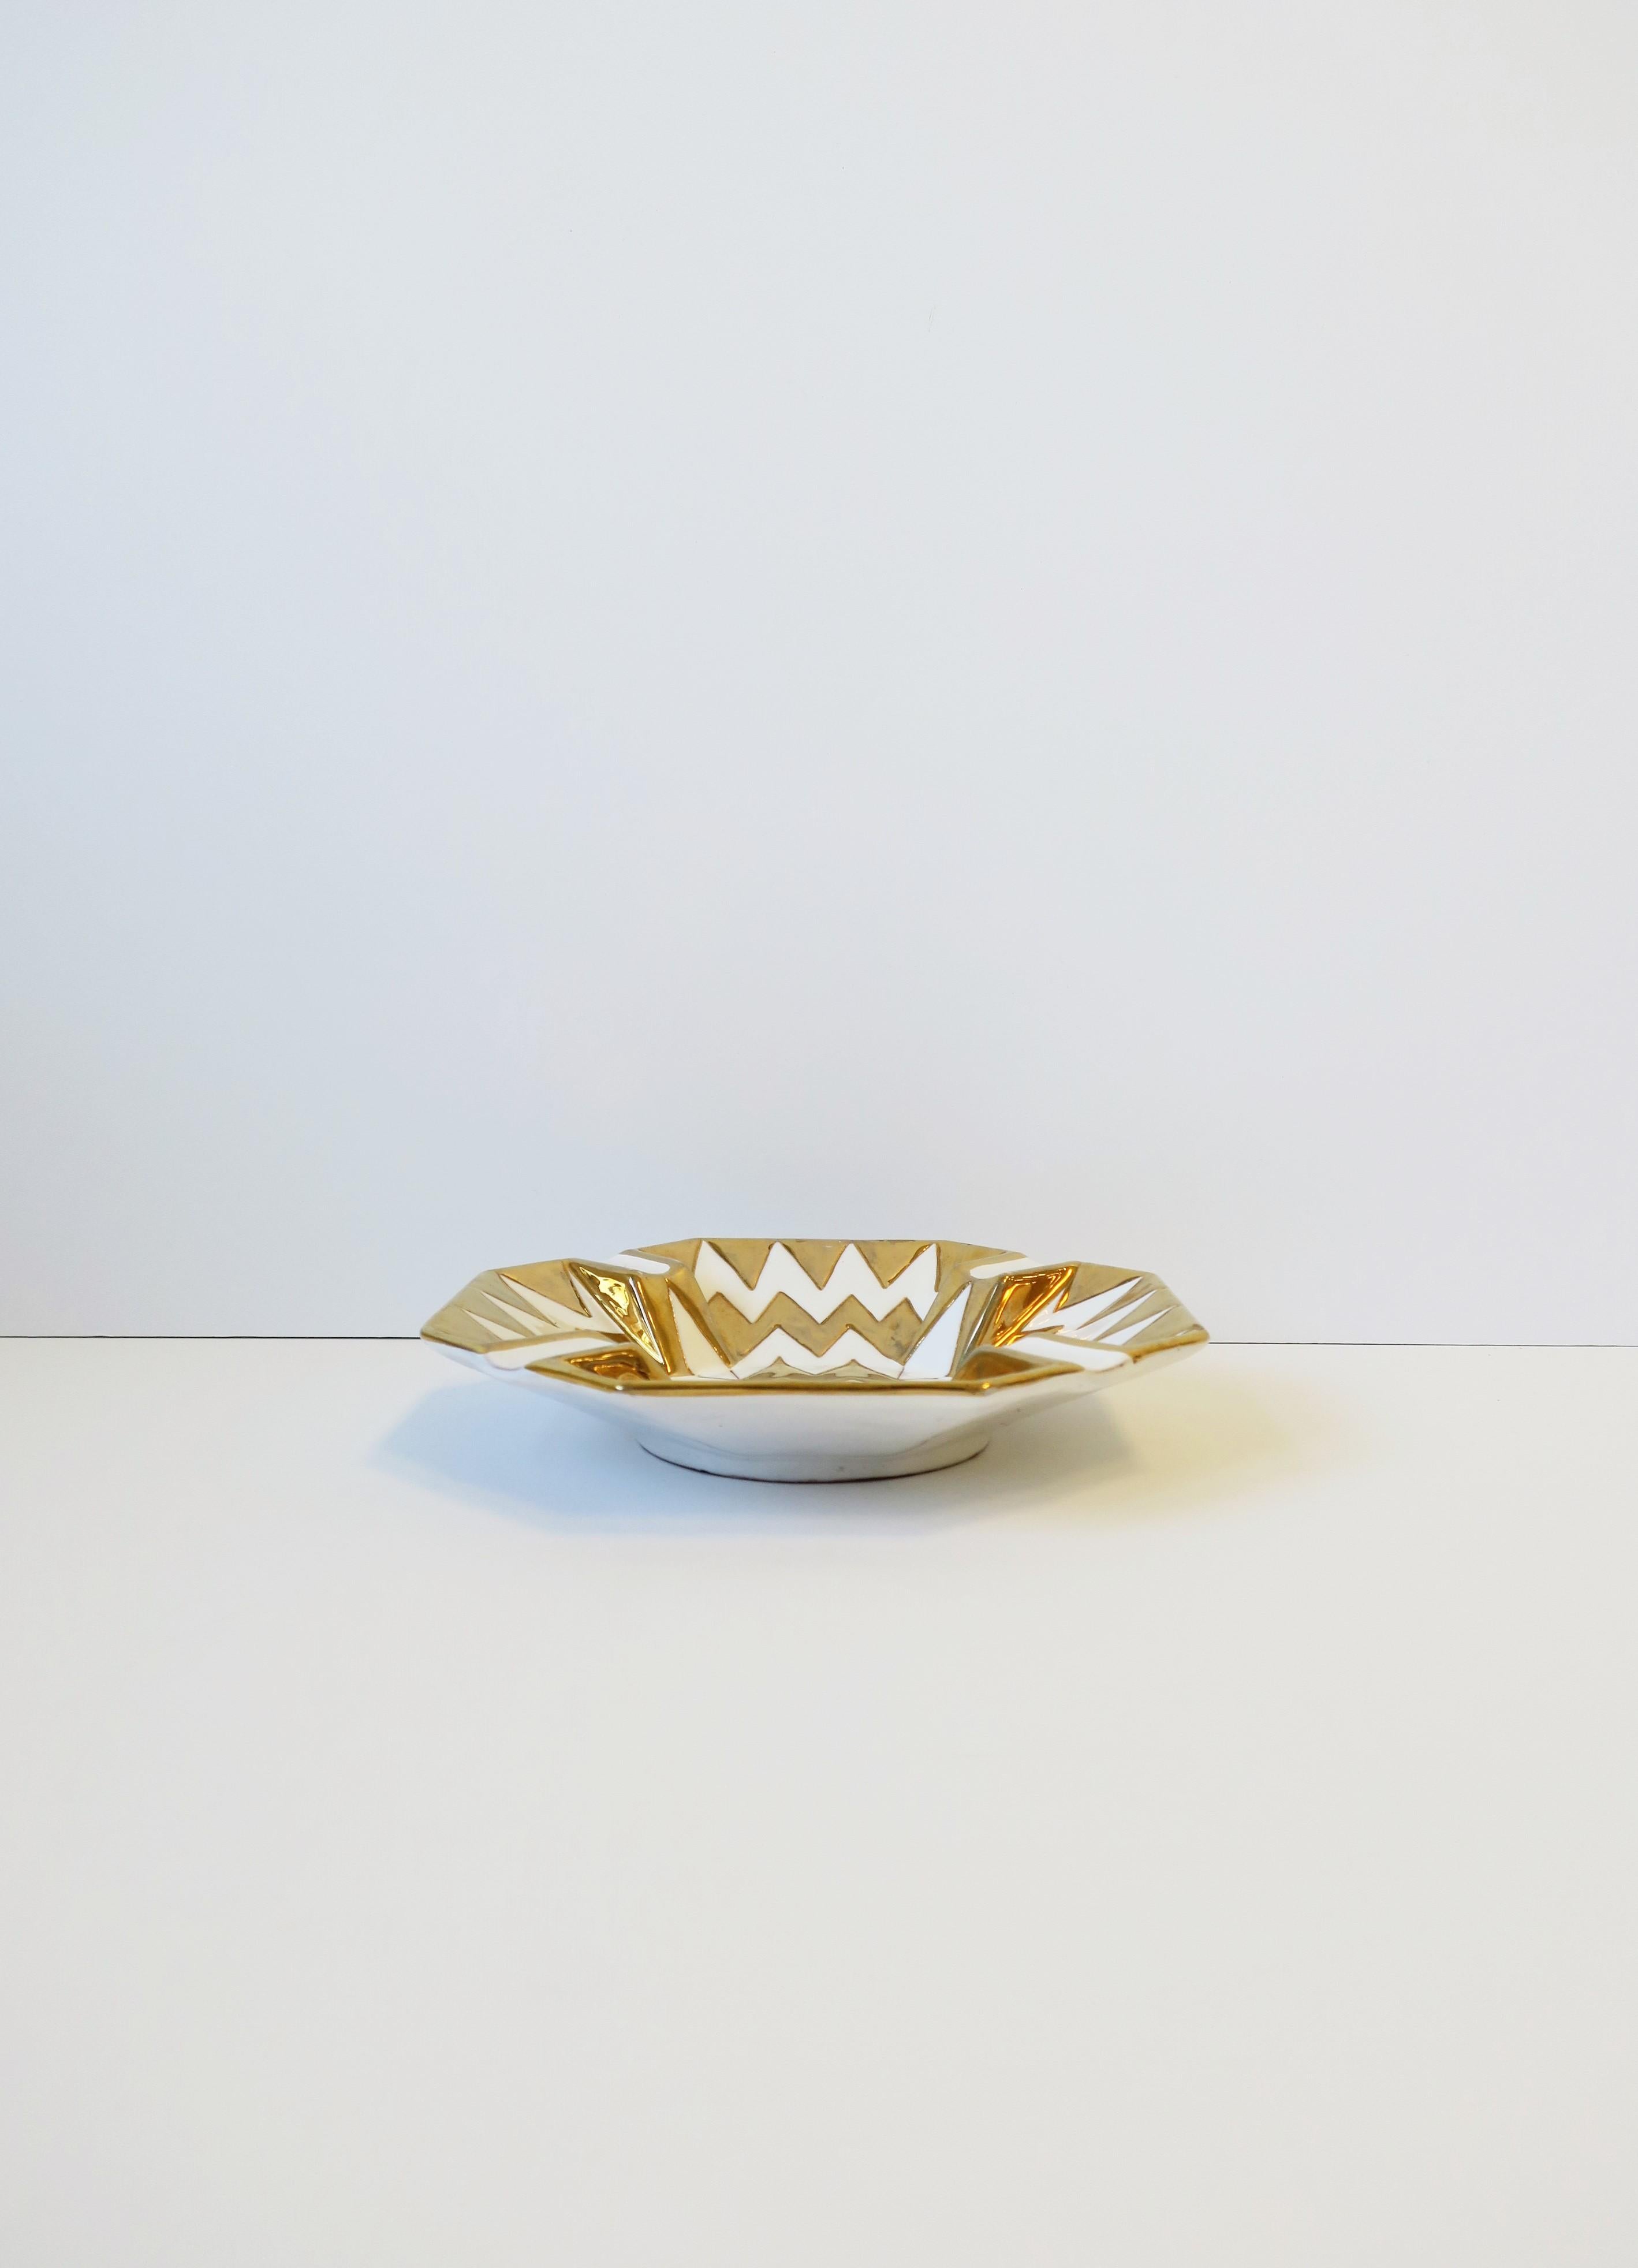 Italian White and Gold Catchall Vide-Poche or Ashtray For Sale 4